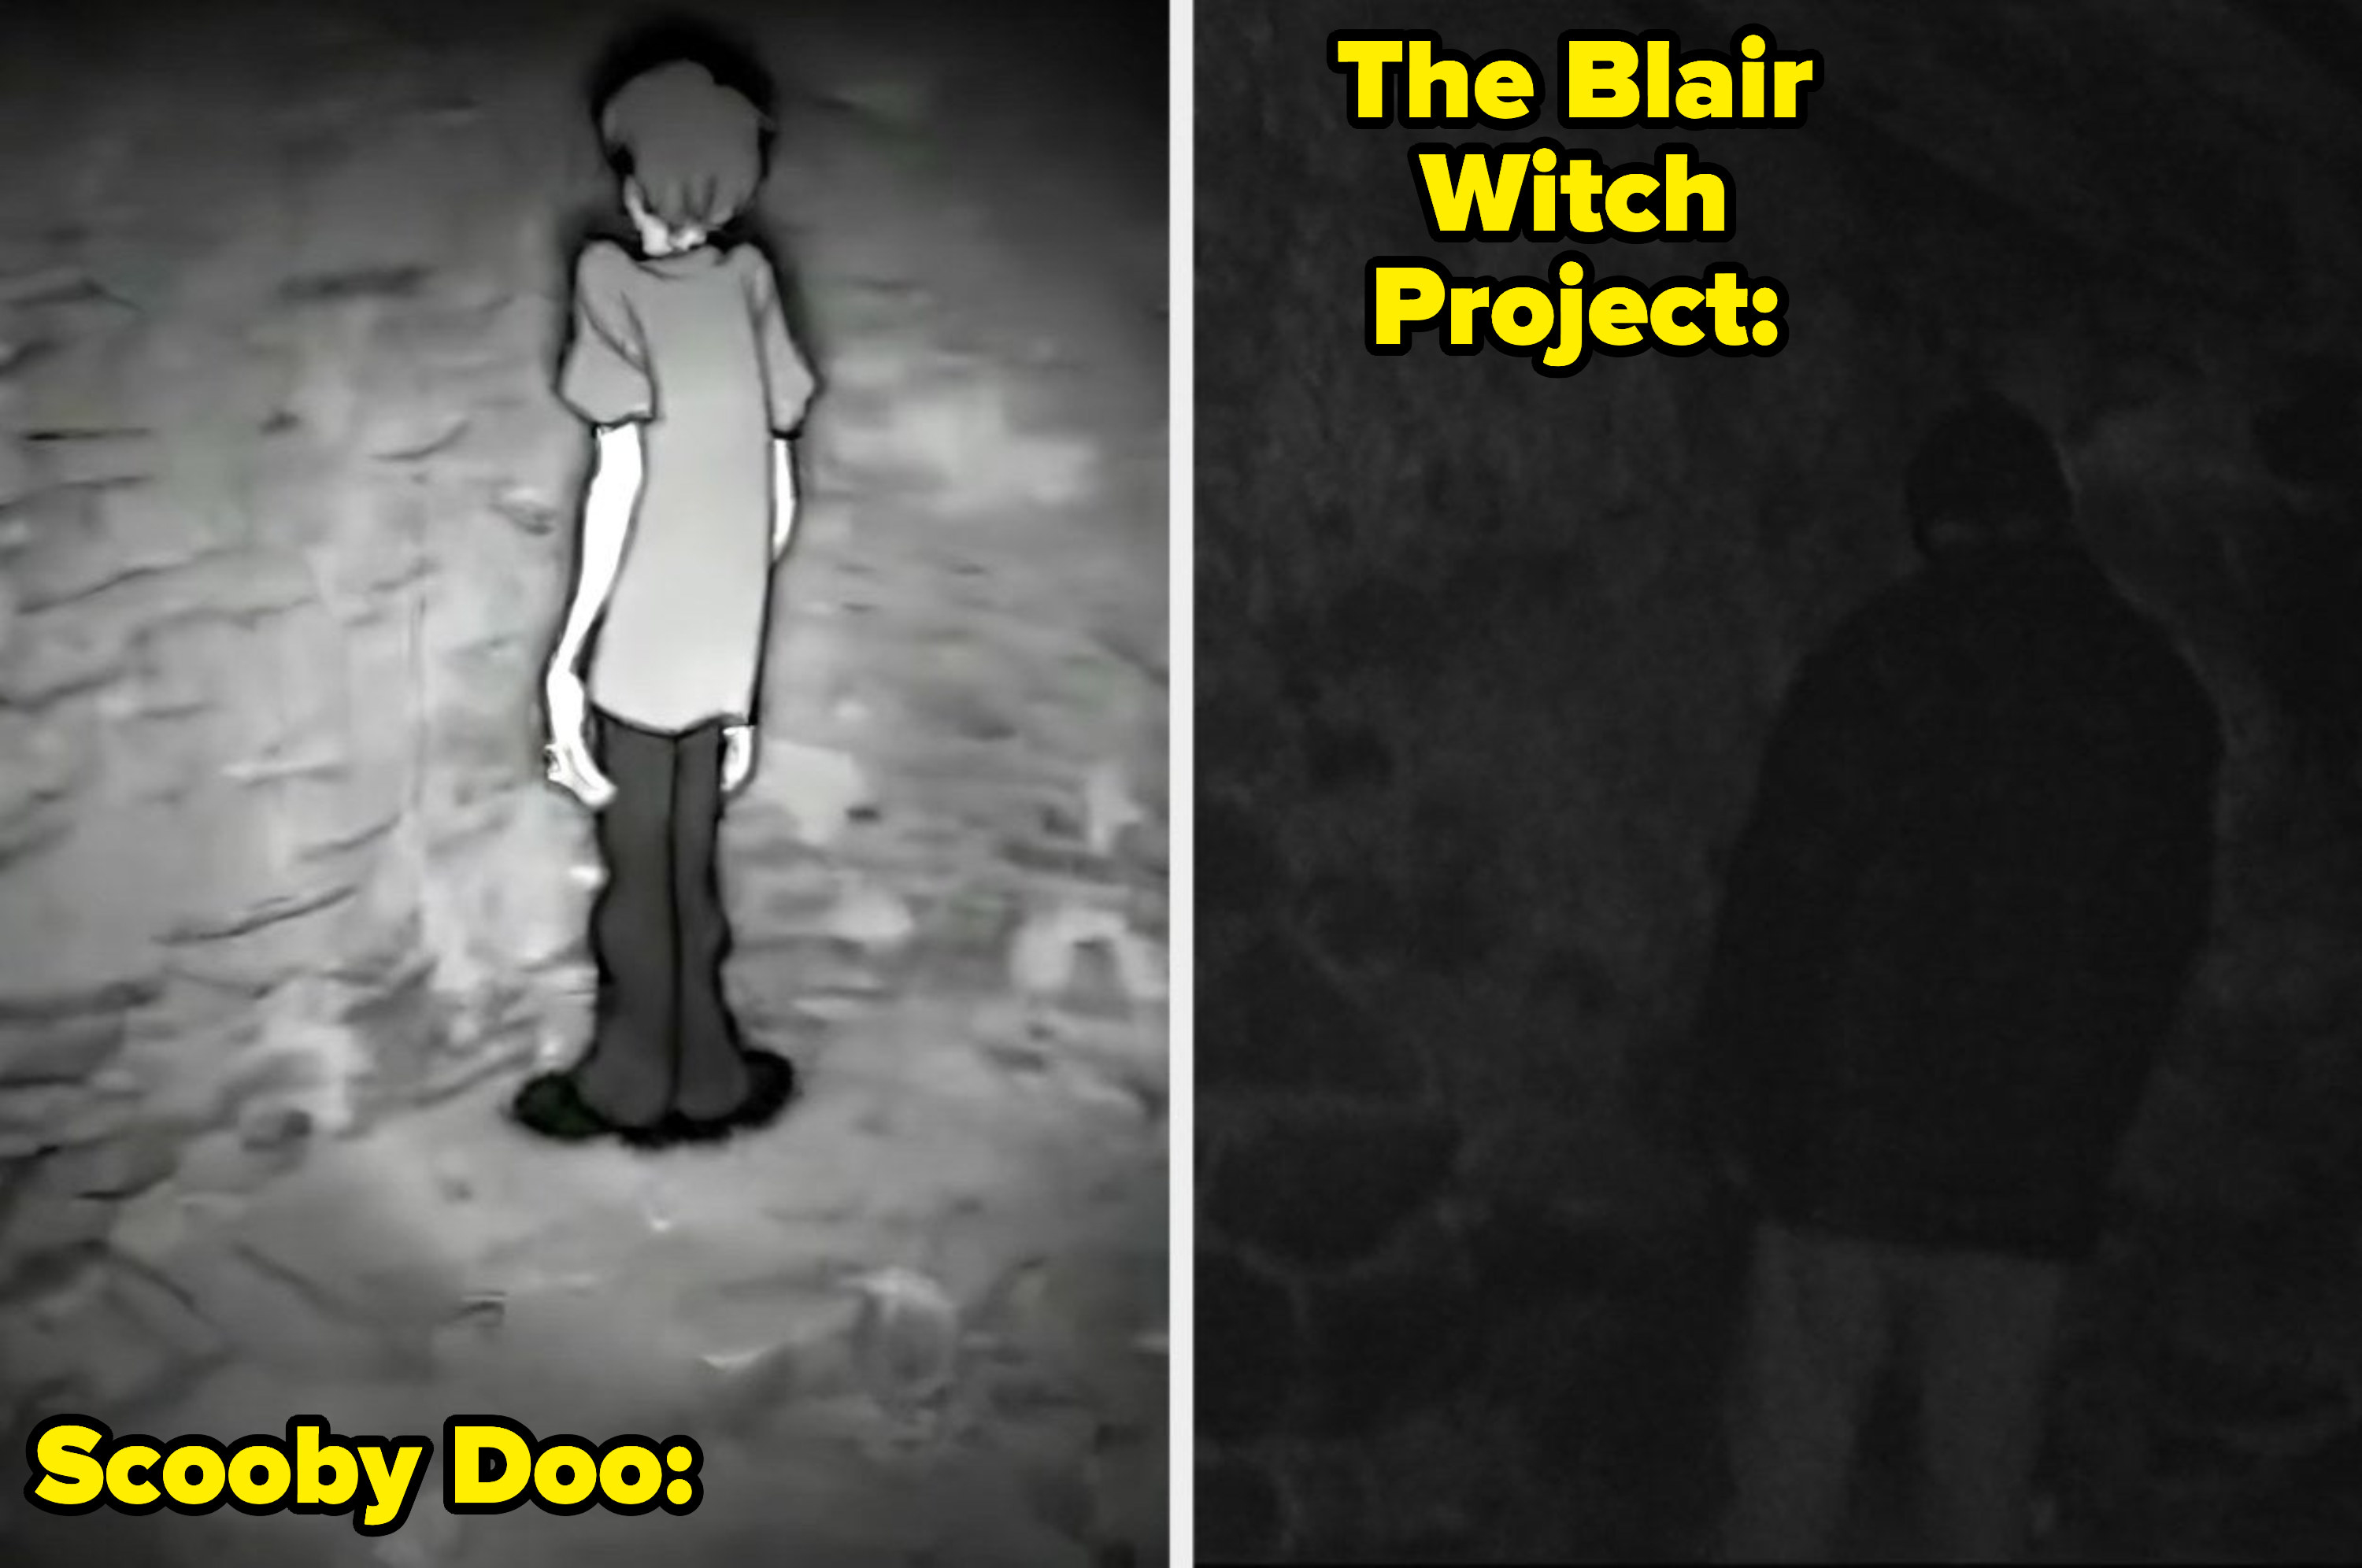 Left: Shaggy faces the corner Right: A man faces the corner in &quot;The Blair Witch Project&quot;